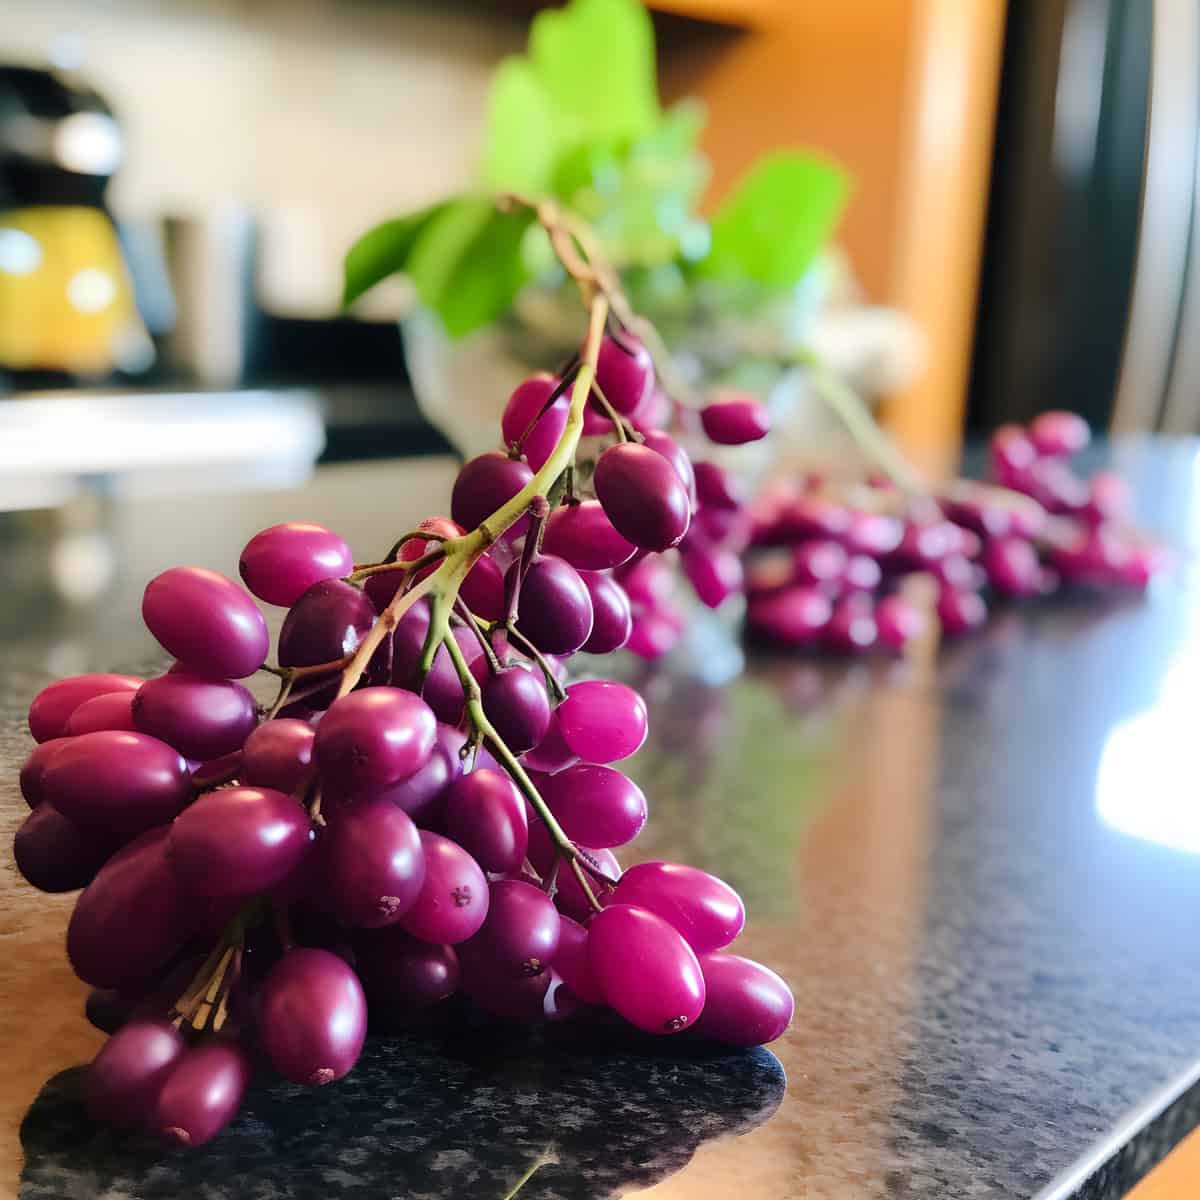 Darwins Barberry on a kitchen counter